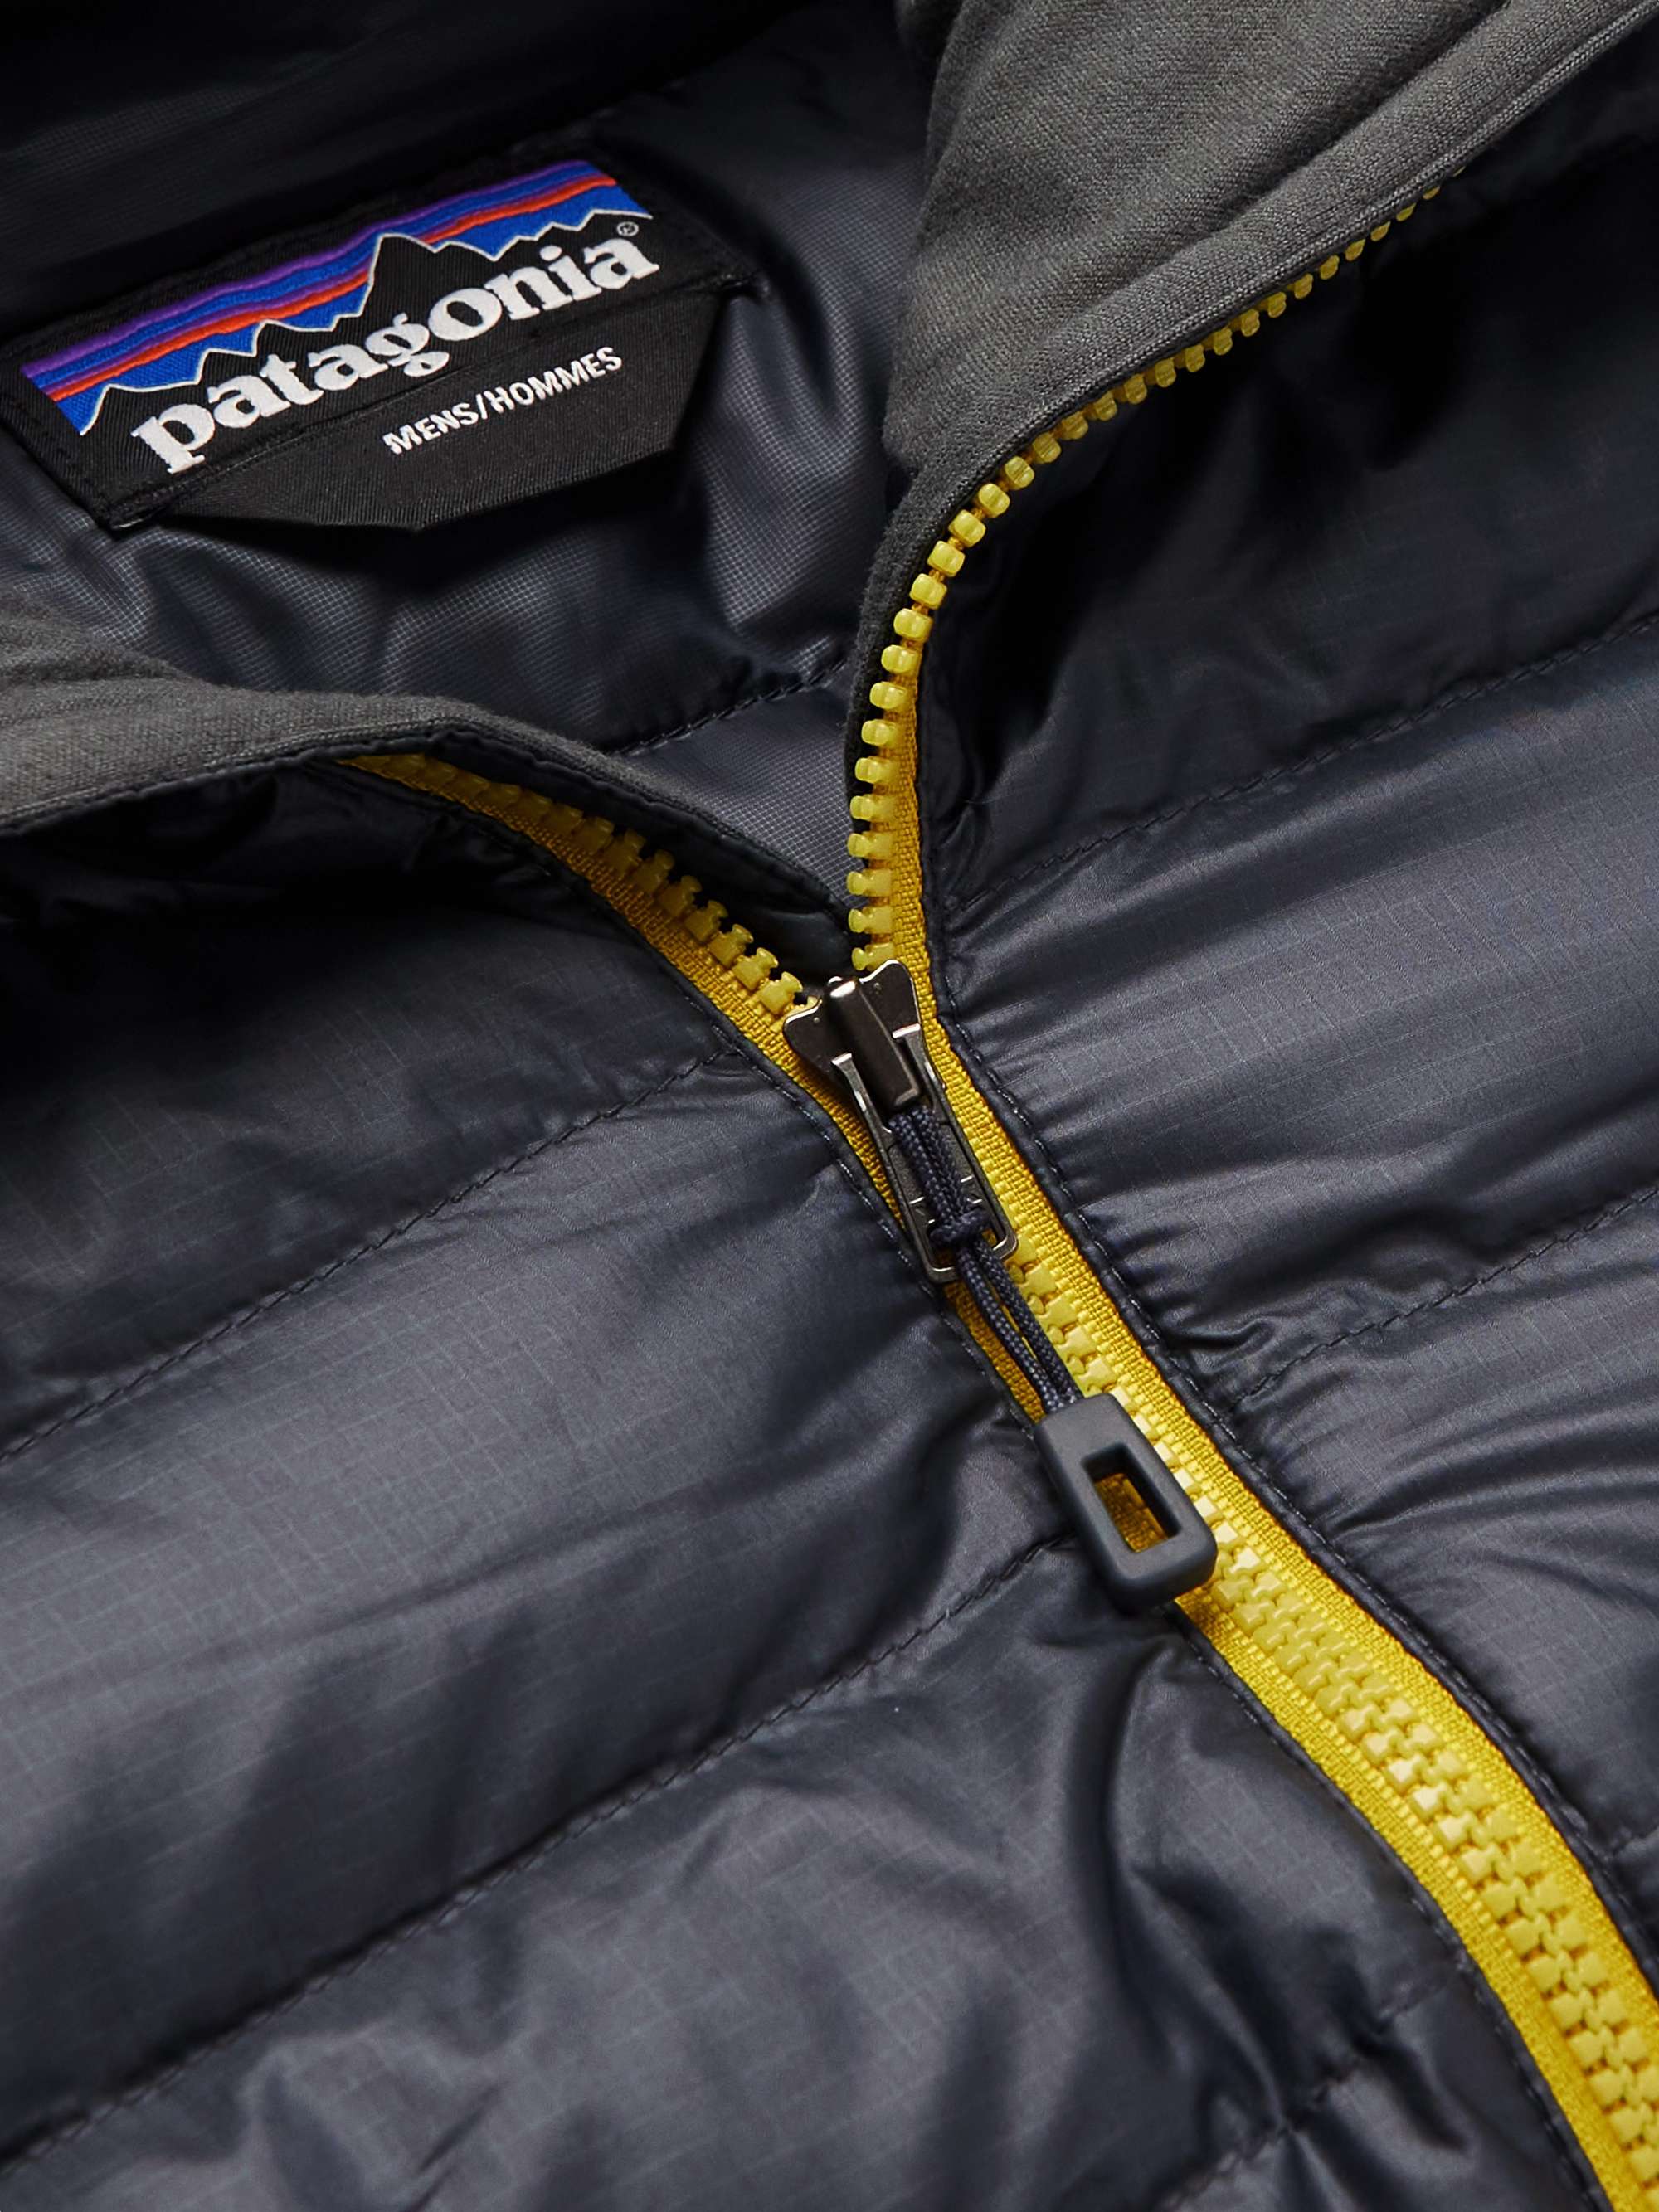 PATAGONIA Quilted DWR-Coated Ripstop Shell Hooded Down Jacket